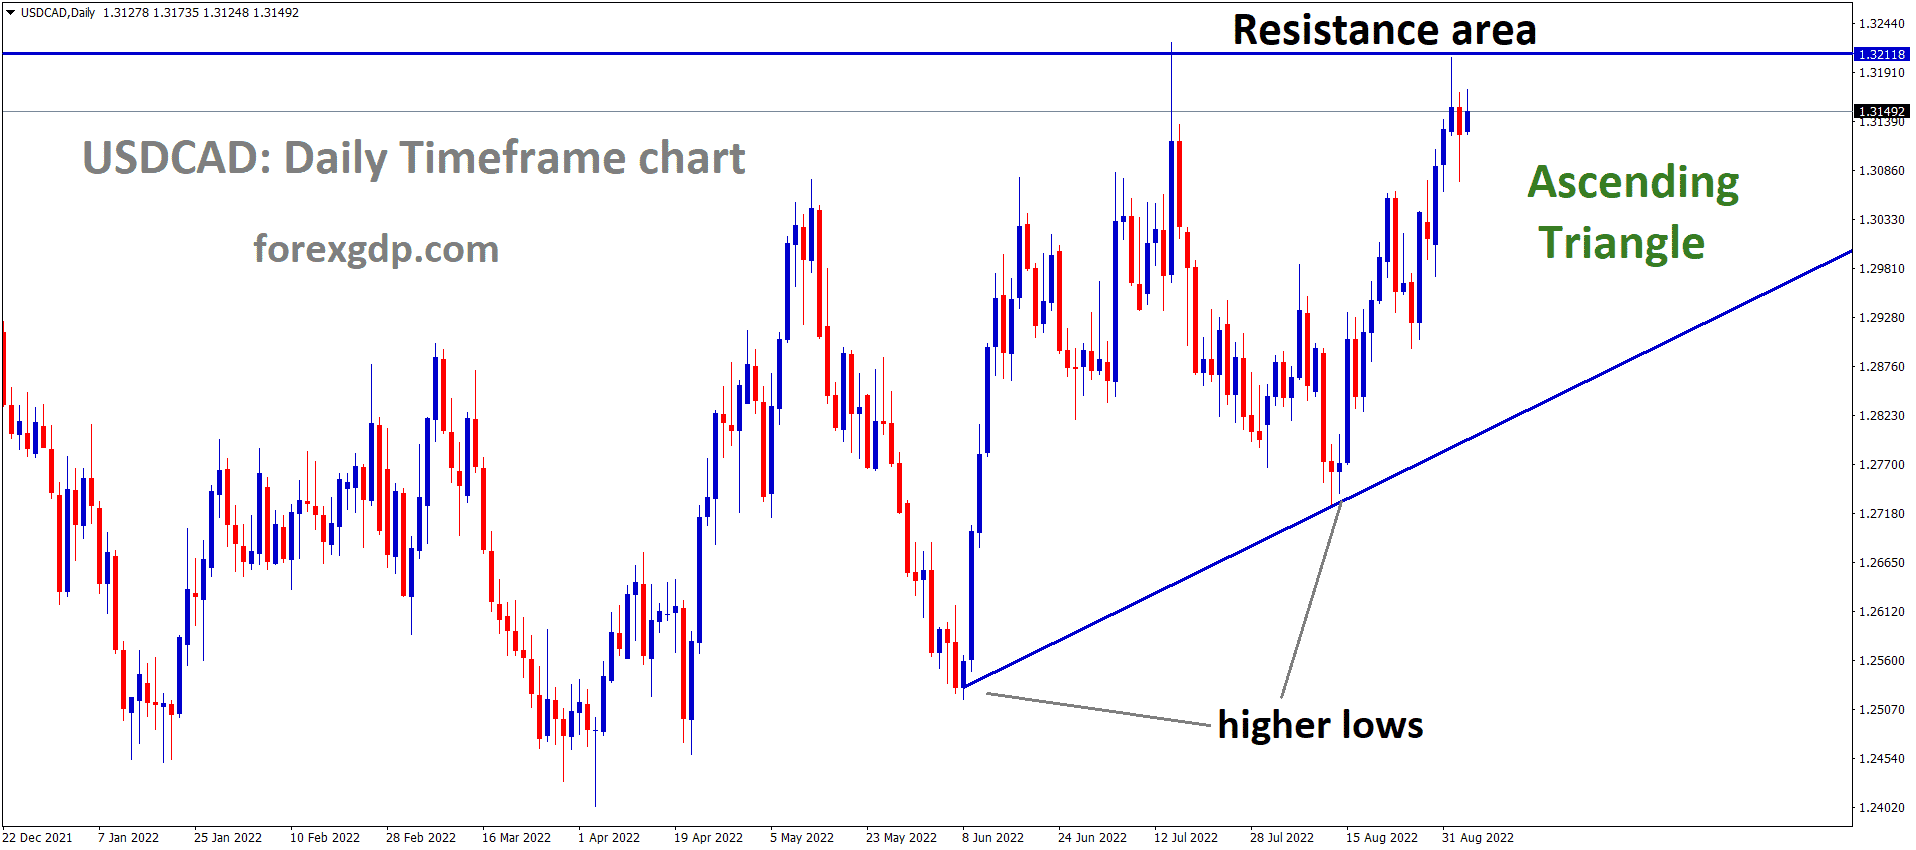 USDCAD is moving in an Ascending triangle pattern and the market has fallen from the horizontal resistance area of the pattern